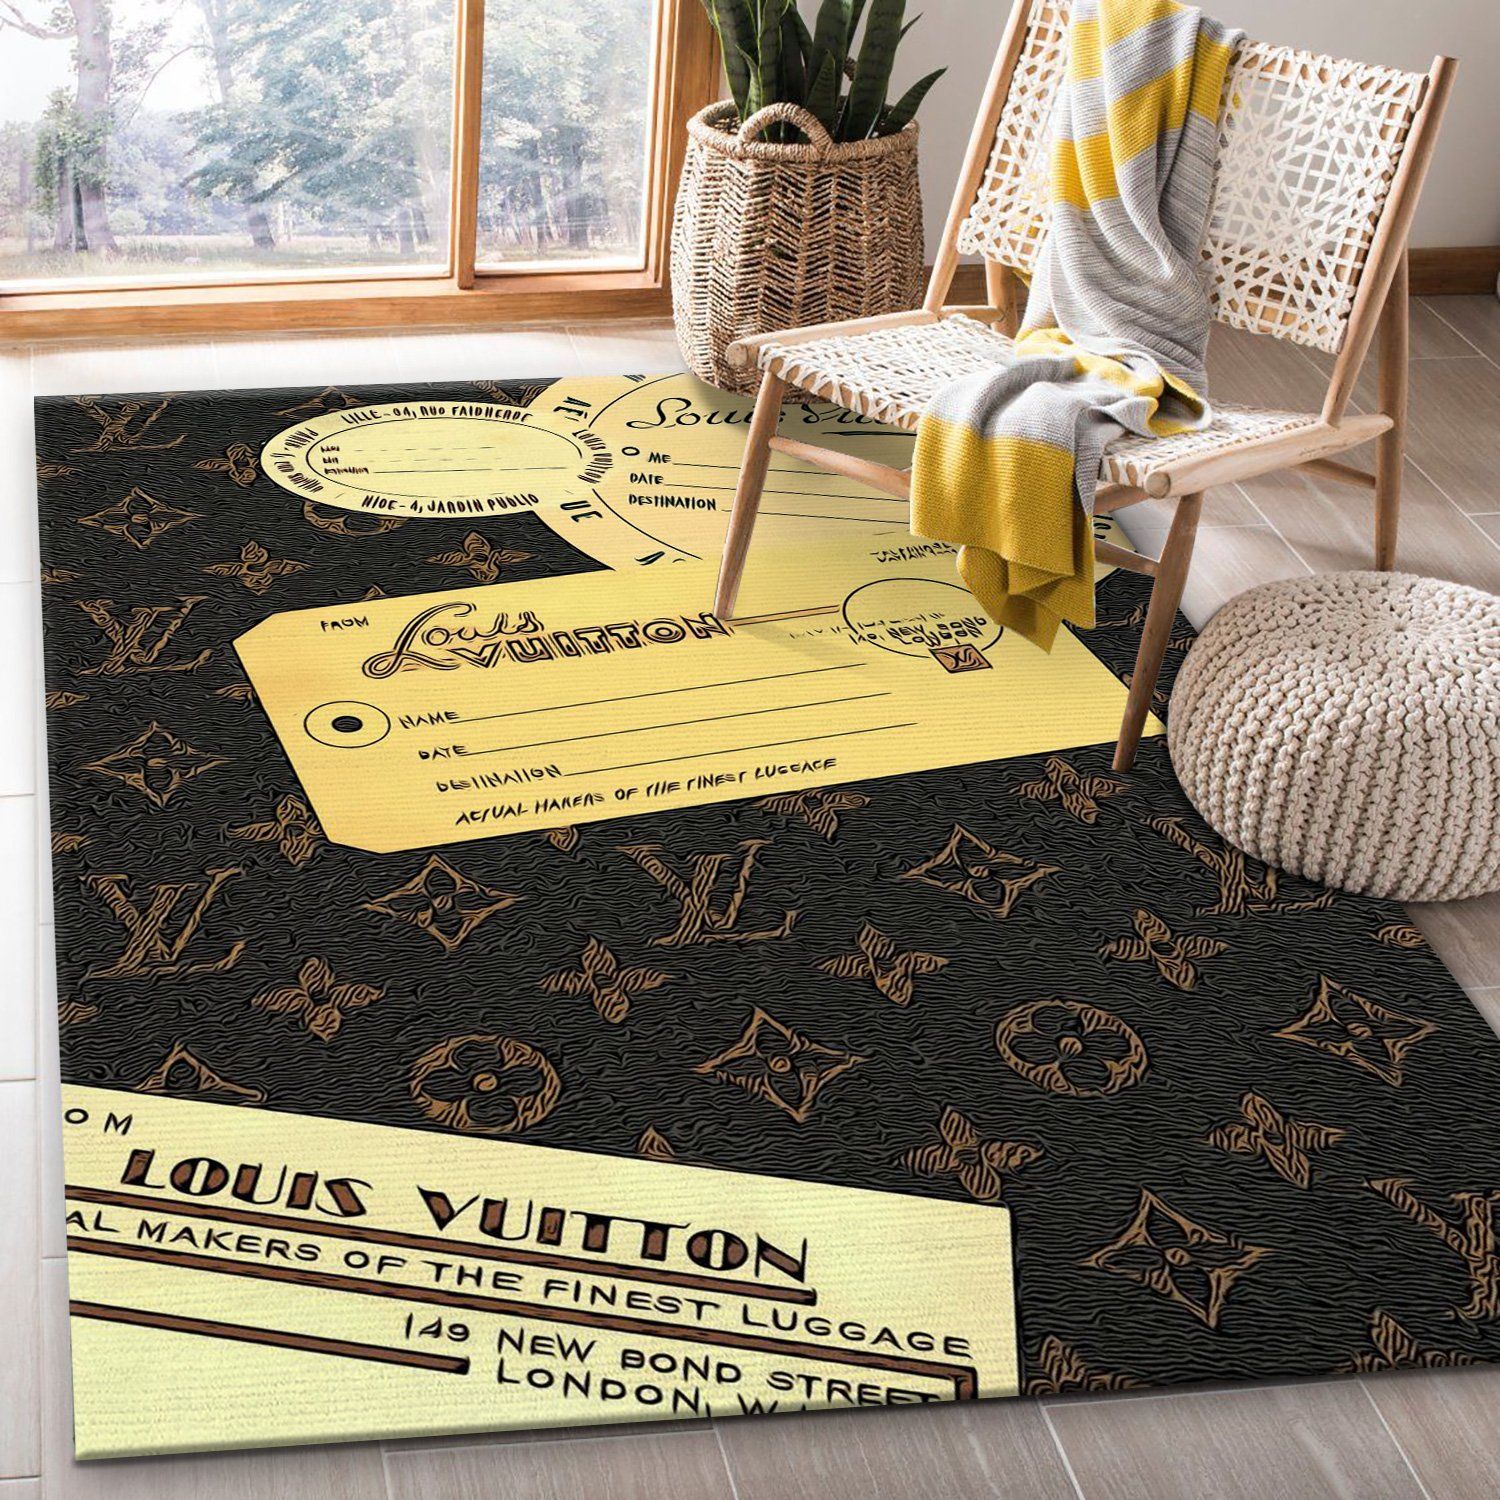 Louis Vuitton Logo Fashion Area Rug Rectangle Living Room Decor Chirstmas  Gift New Version - Infinite Creativity. Spend Less. Smile More